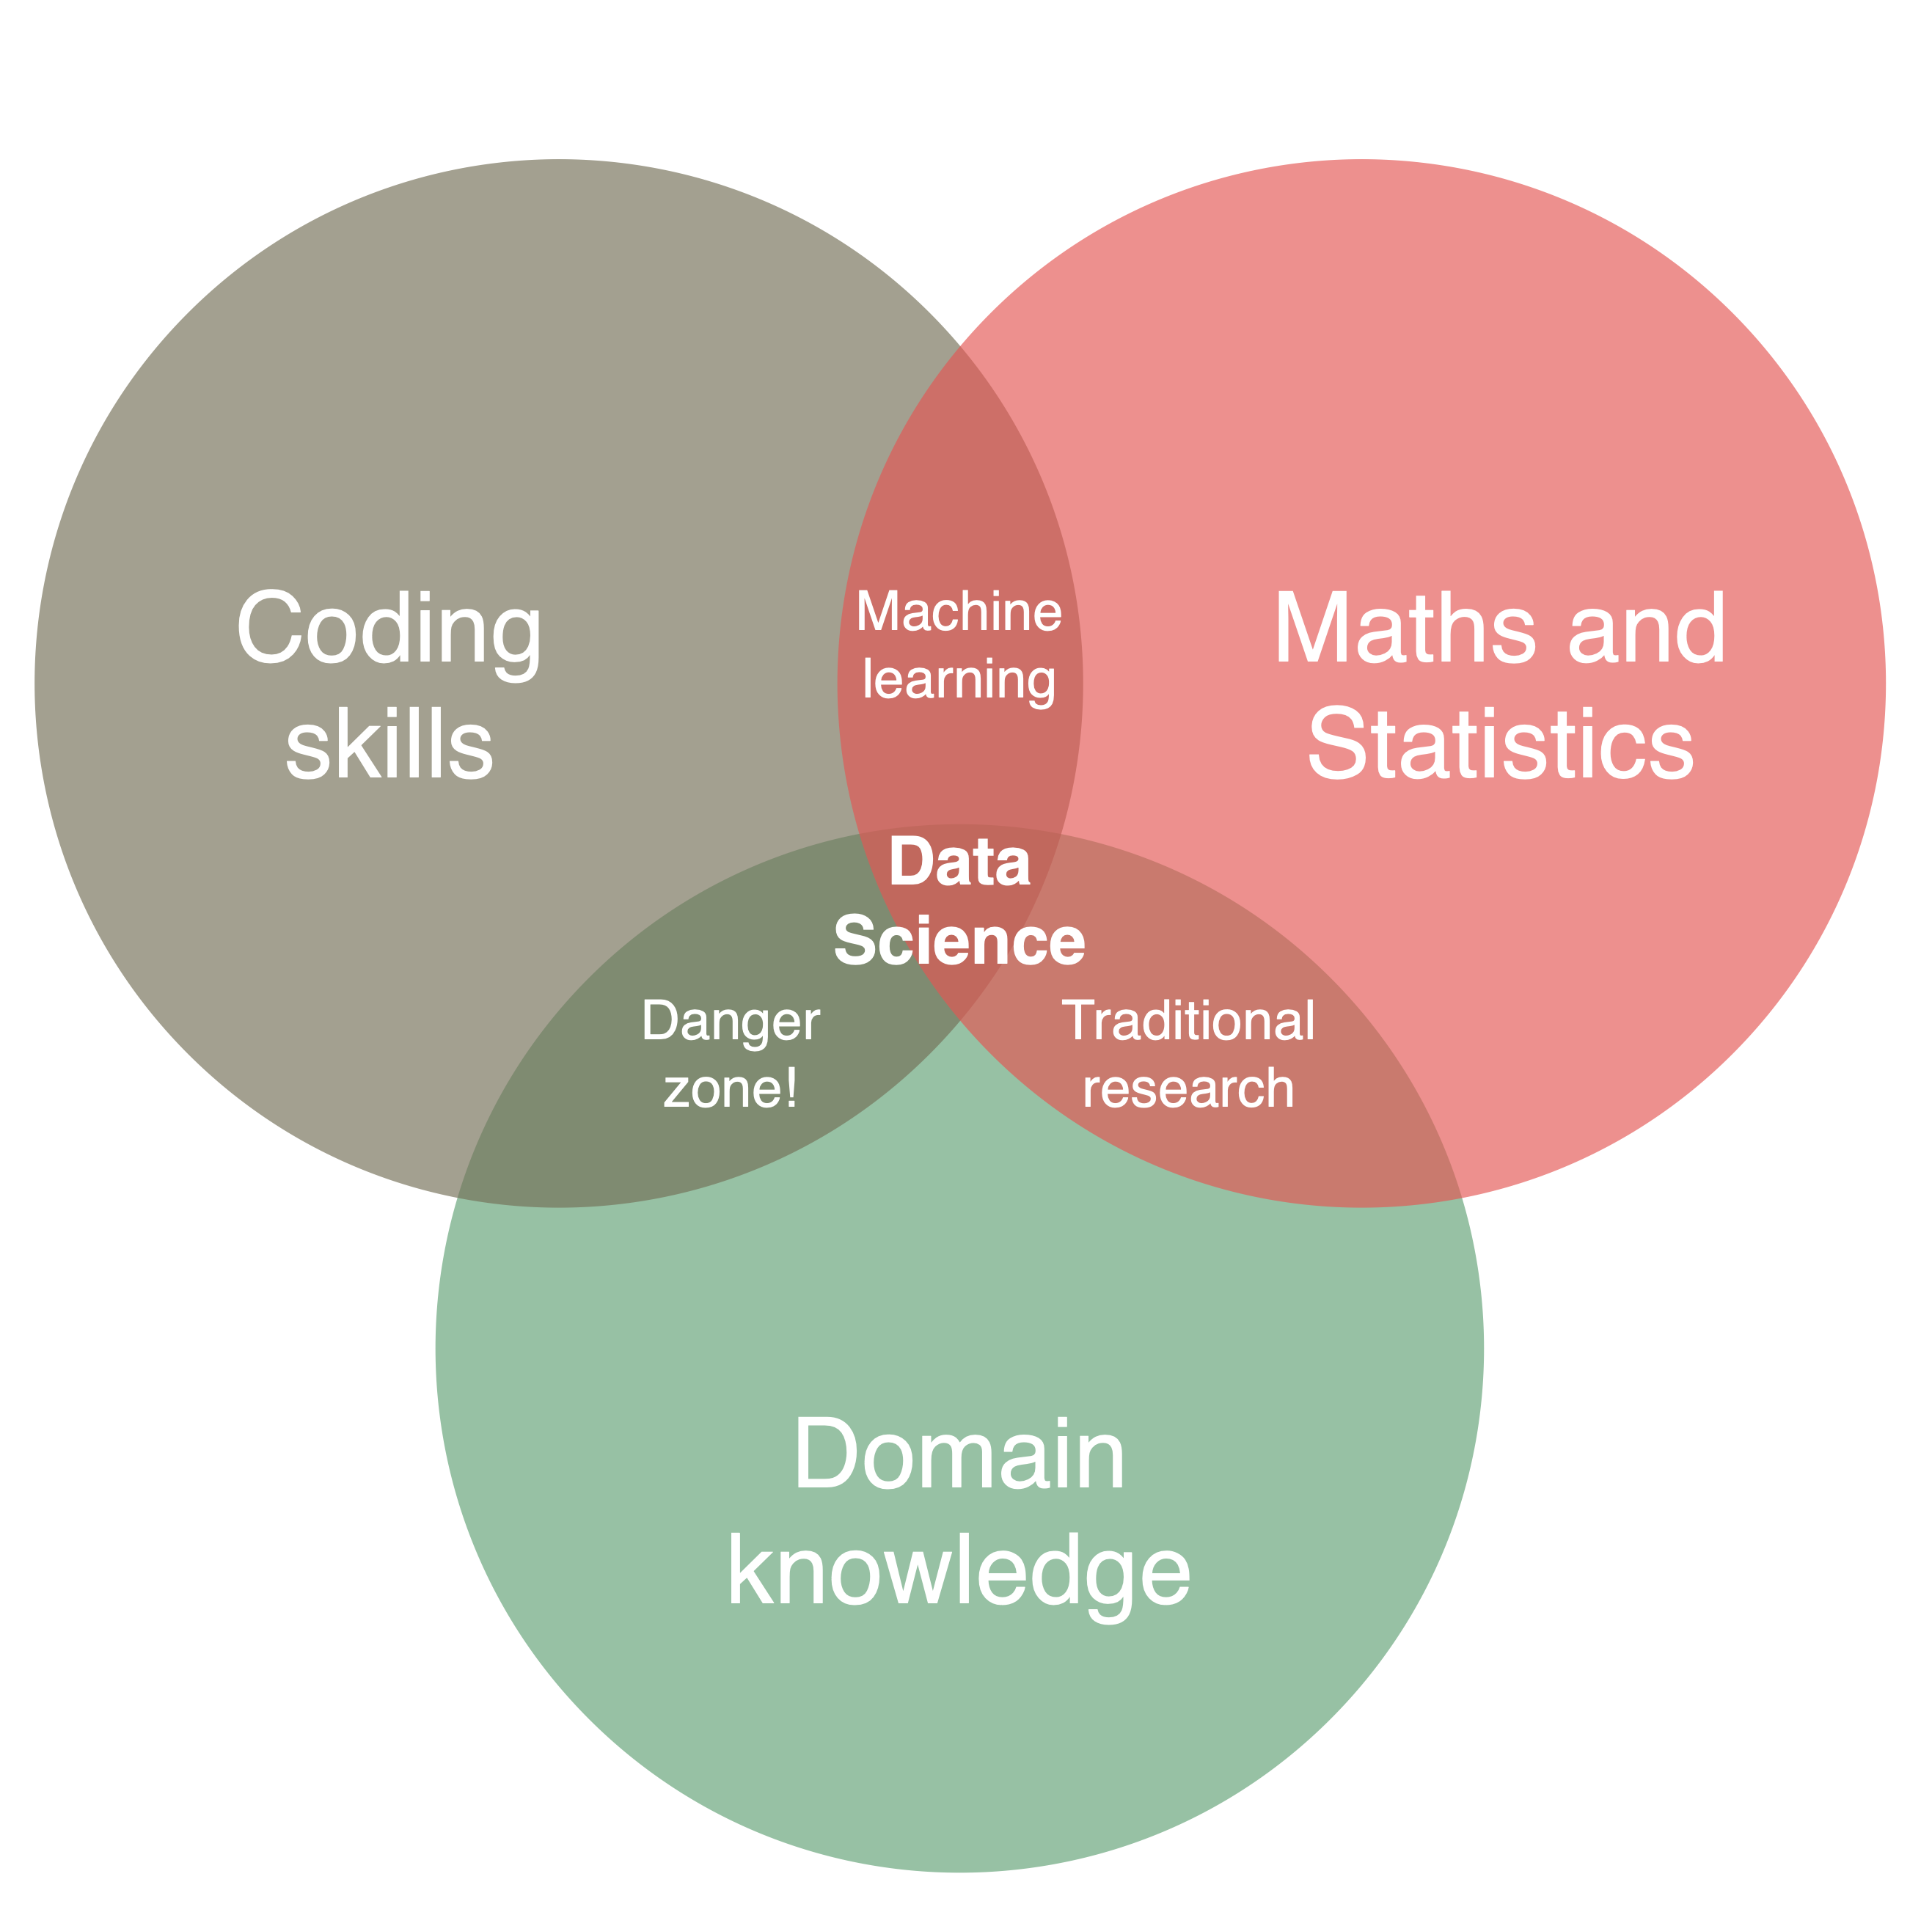 The Venn diagram of data science. Adapted from [Conway, 2013](http://drewconway.com/zia/2013/3/26/the-data-science-venn-diagram).